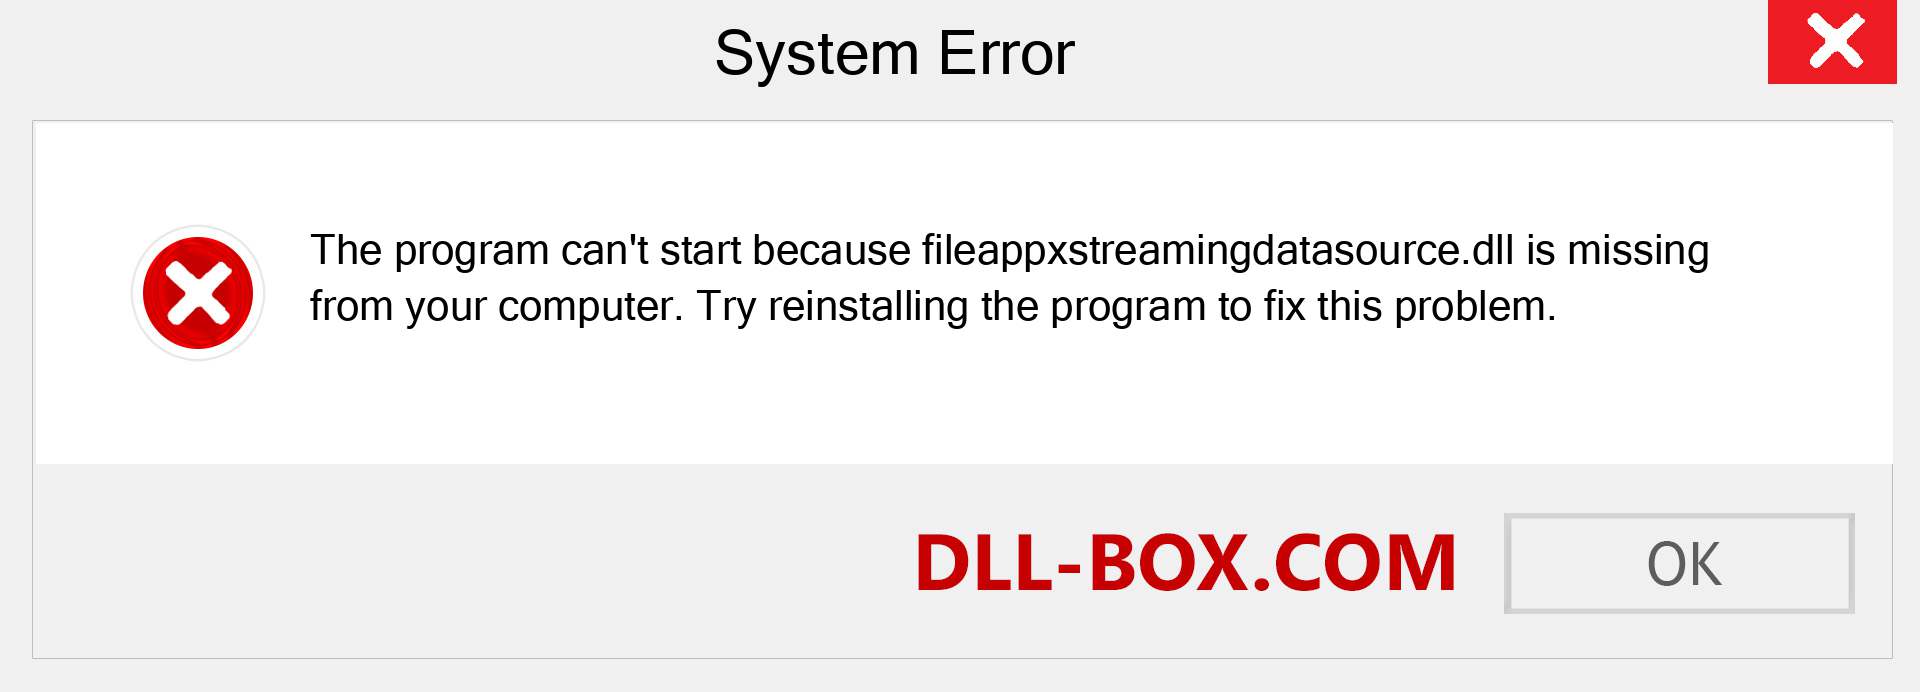  fileappxstreamingdatasource.dll file is missing?. Download for Windows 7, 8, 10 - Fix  fileappxstreamingdatasource dll Missing Error on Windows, photos, images